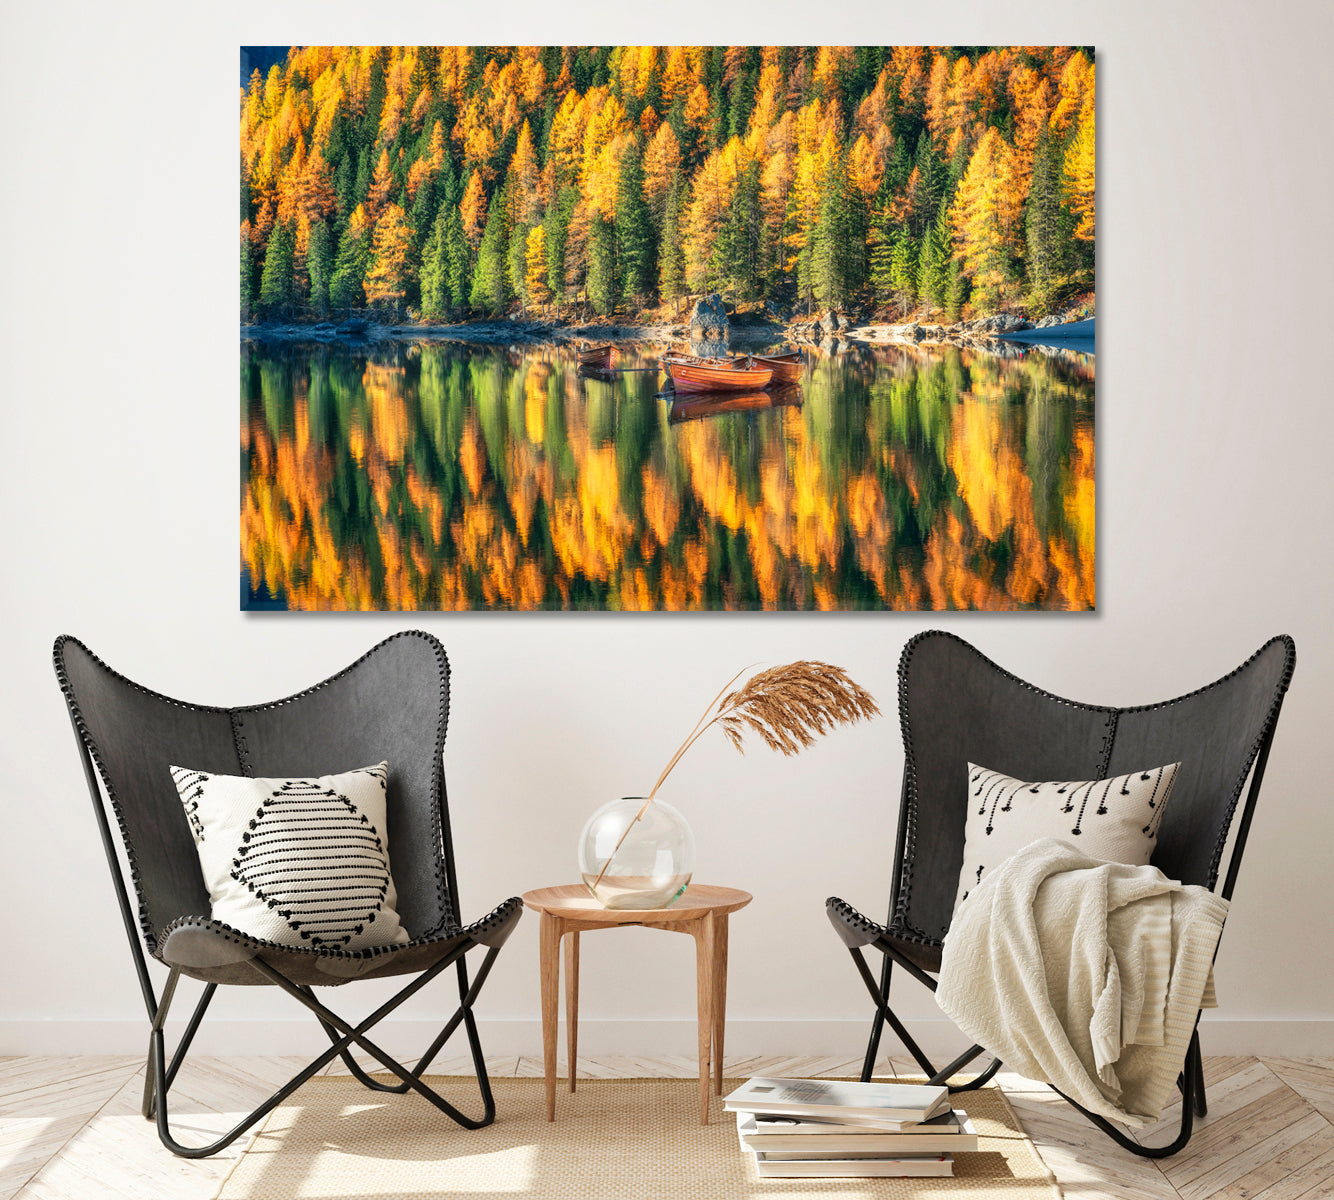 Wooden Boats in Braies Lake Autumn Dolomites Italy Canvas Print ArtLexy 1 Panel 24"x16" inches 